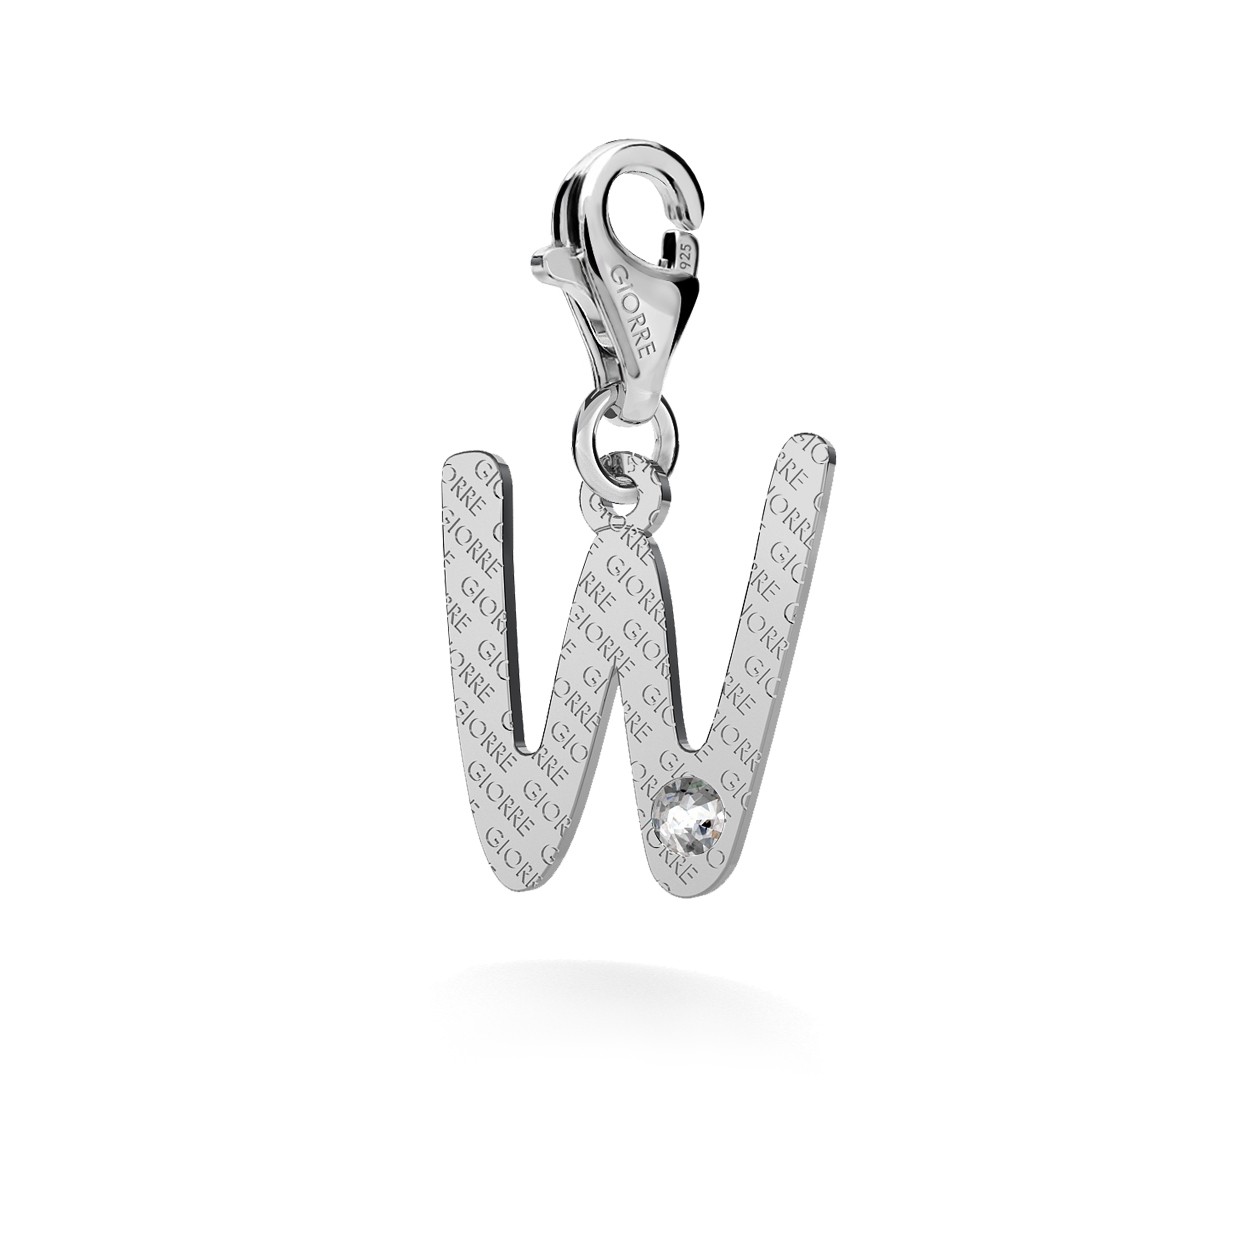 CHARM 28, LETTERS A - V, SILVER 925,  RHODIUM OR GOLD PLATED